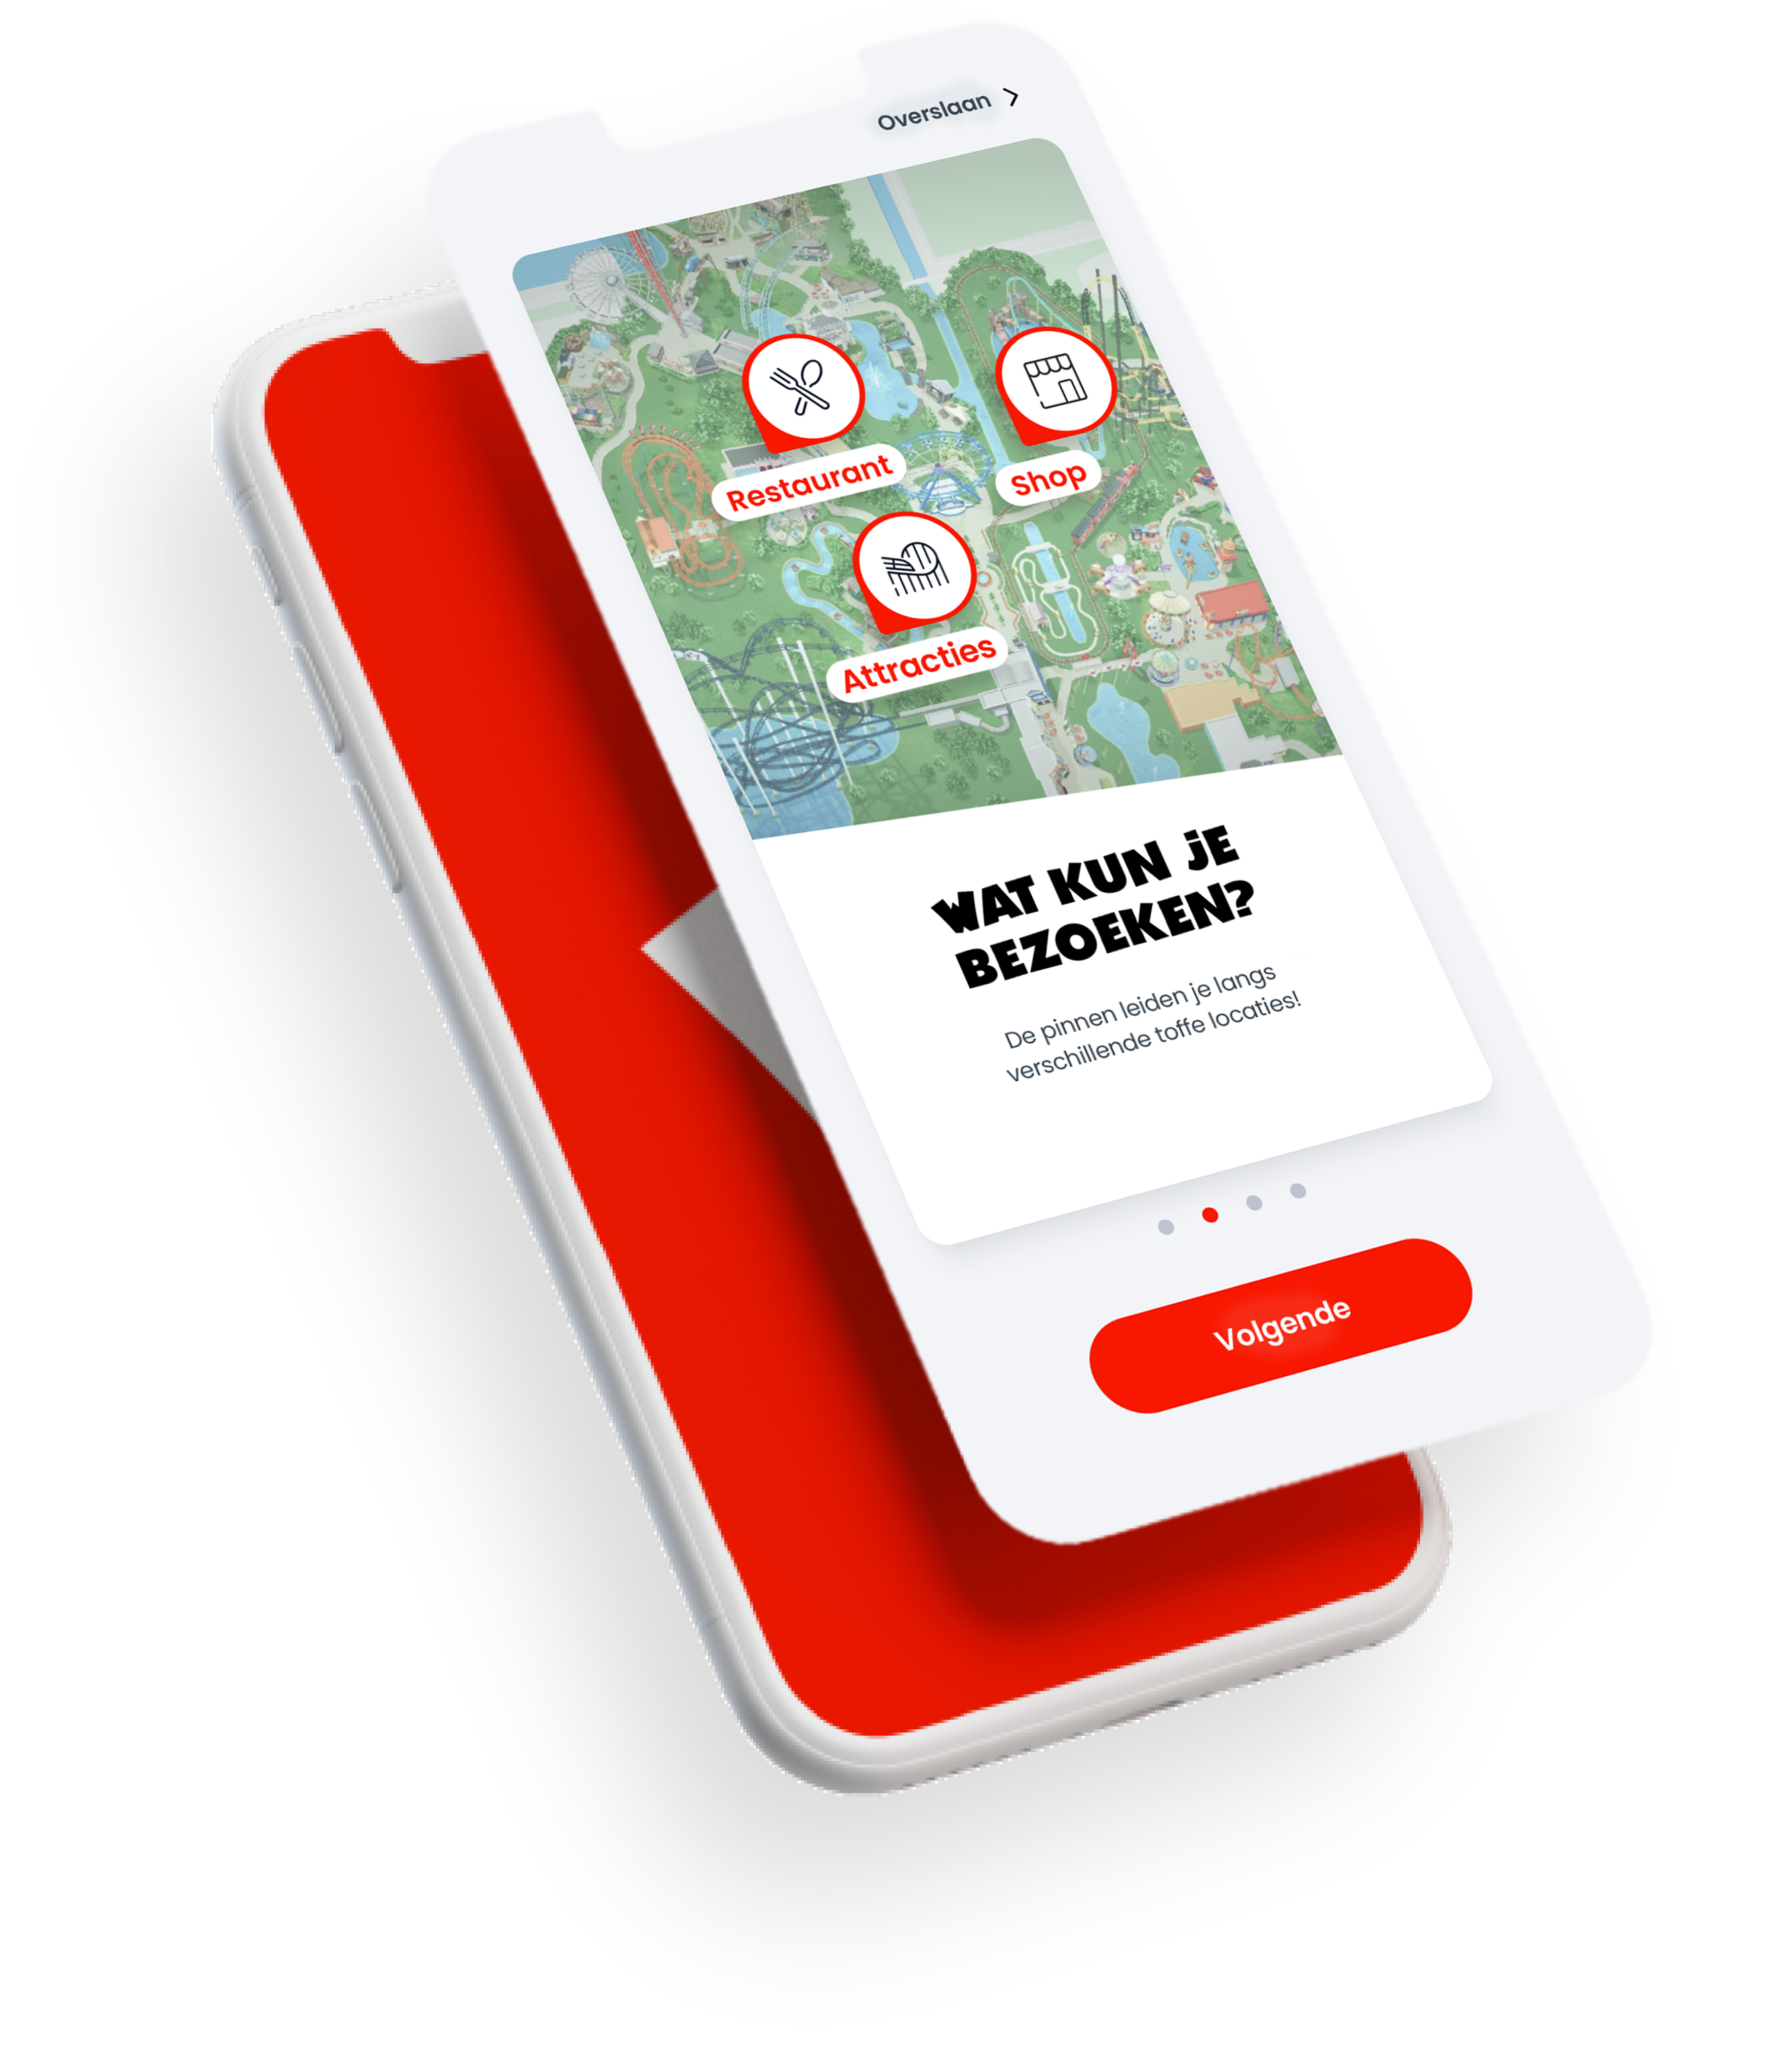 The park in your back pocket - Download the Walibi App